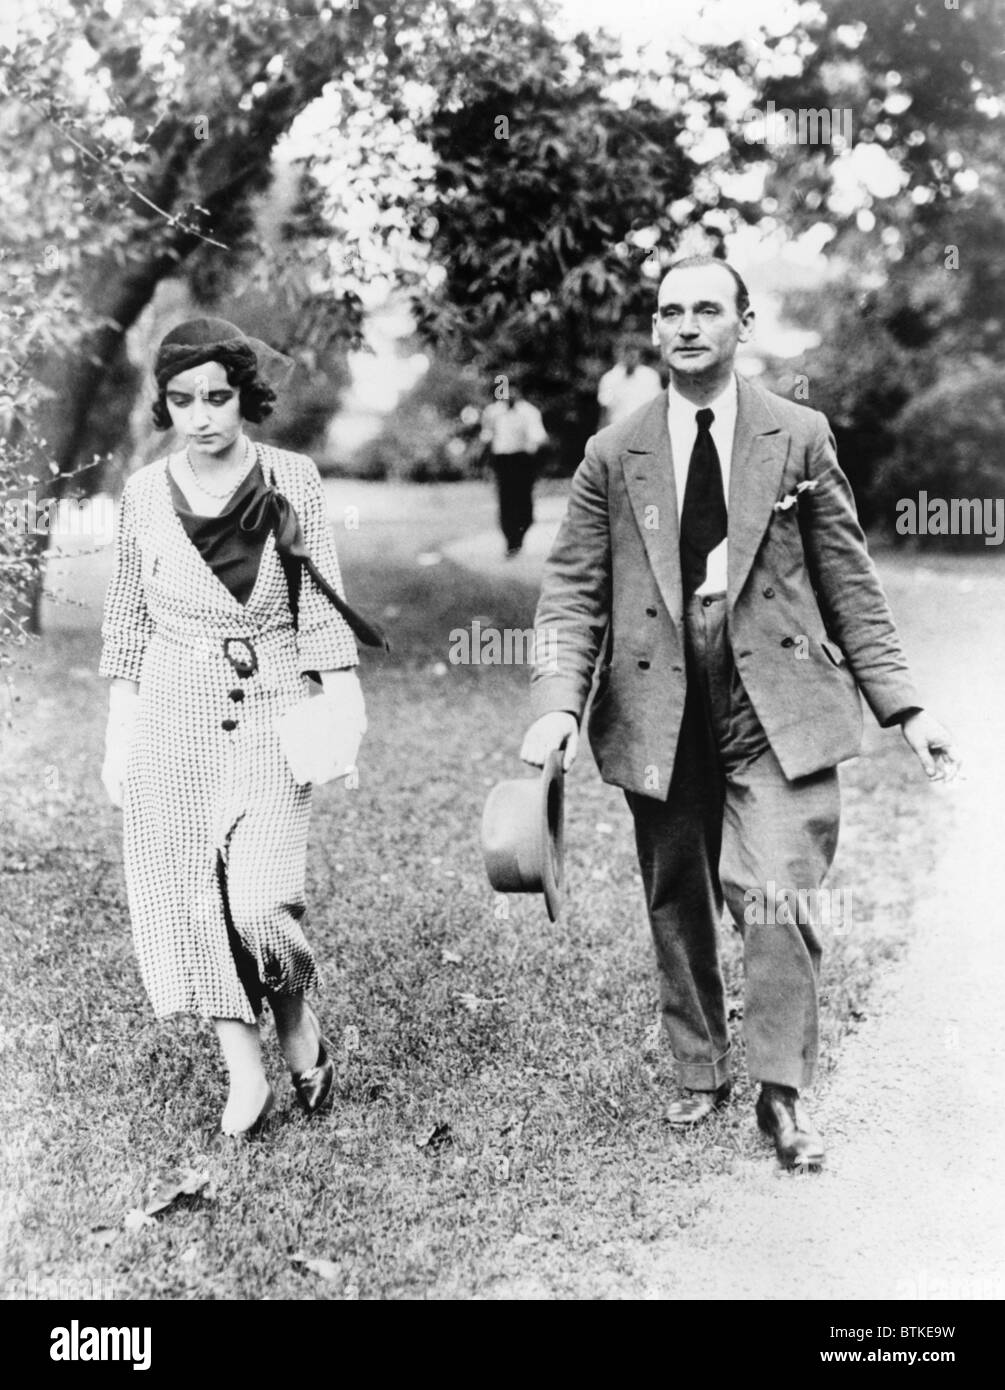 Betty Gow, nurse of the Lindbergh baby, and Ollie Wheatley, the butler, at the Lindbergh's home in Hopewell, N.J. It was Gow who first discovered the baby missing on March 1, 1932. Stock Photo